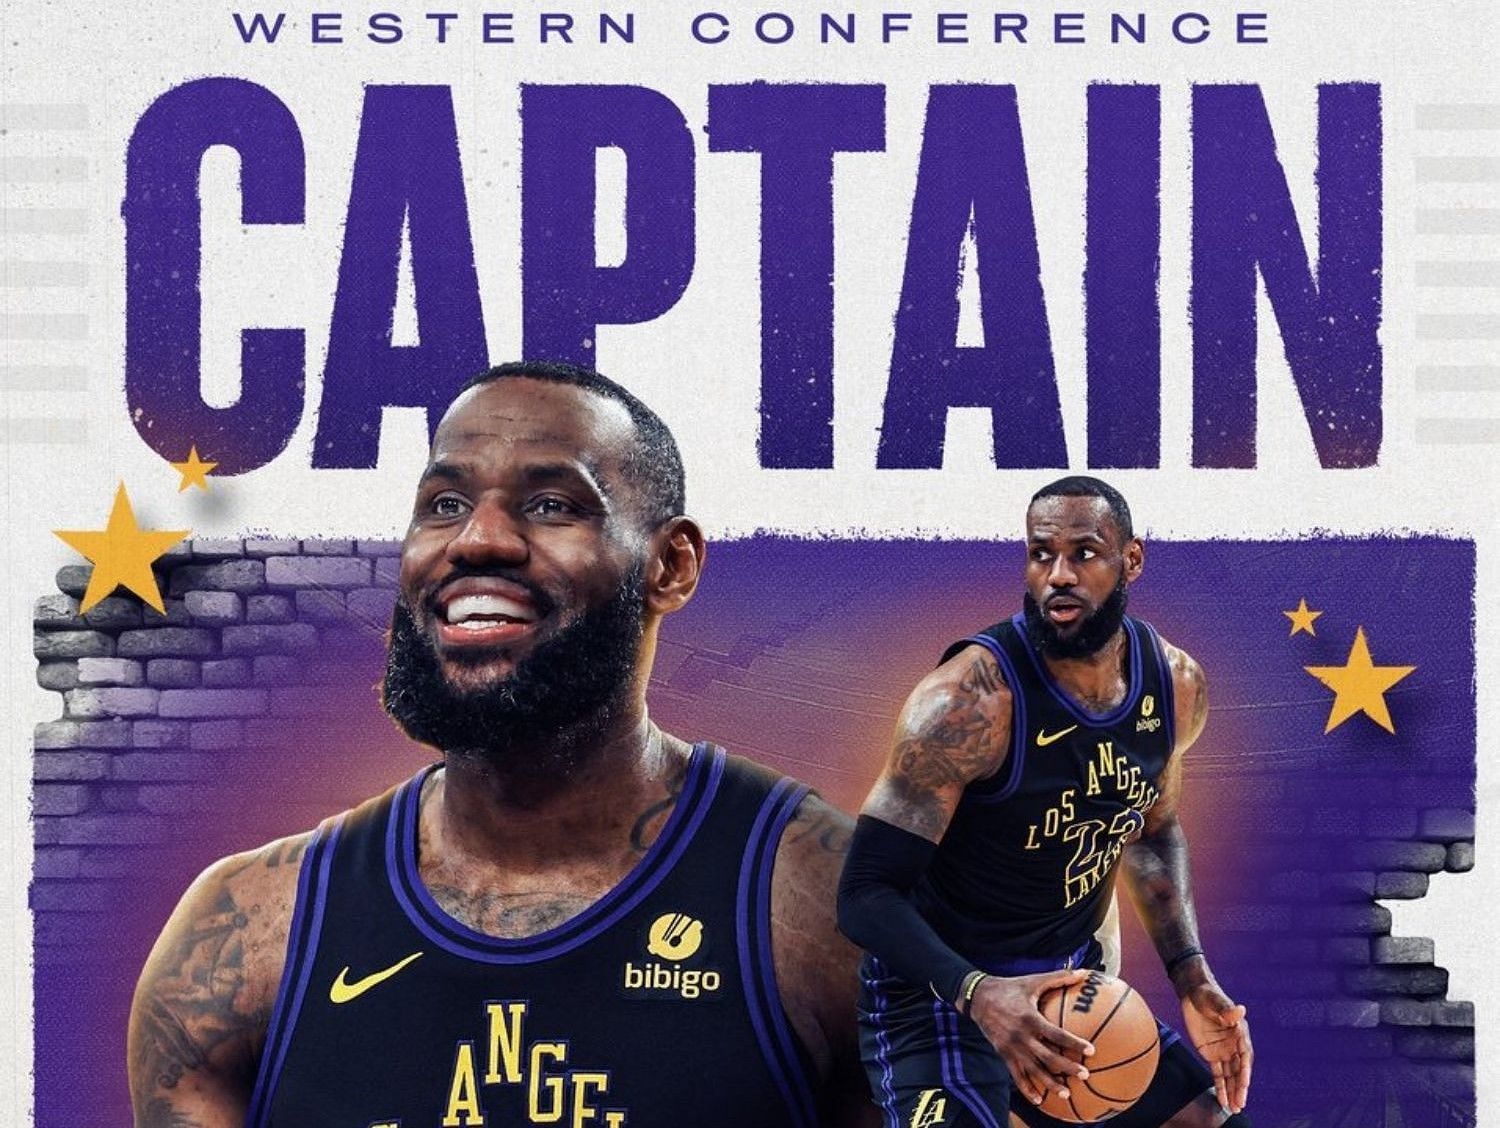 LeBron James of the LA Lakers was named captain of the West team for this year